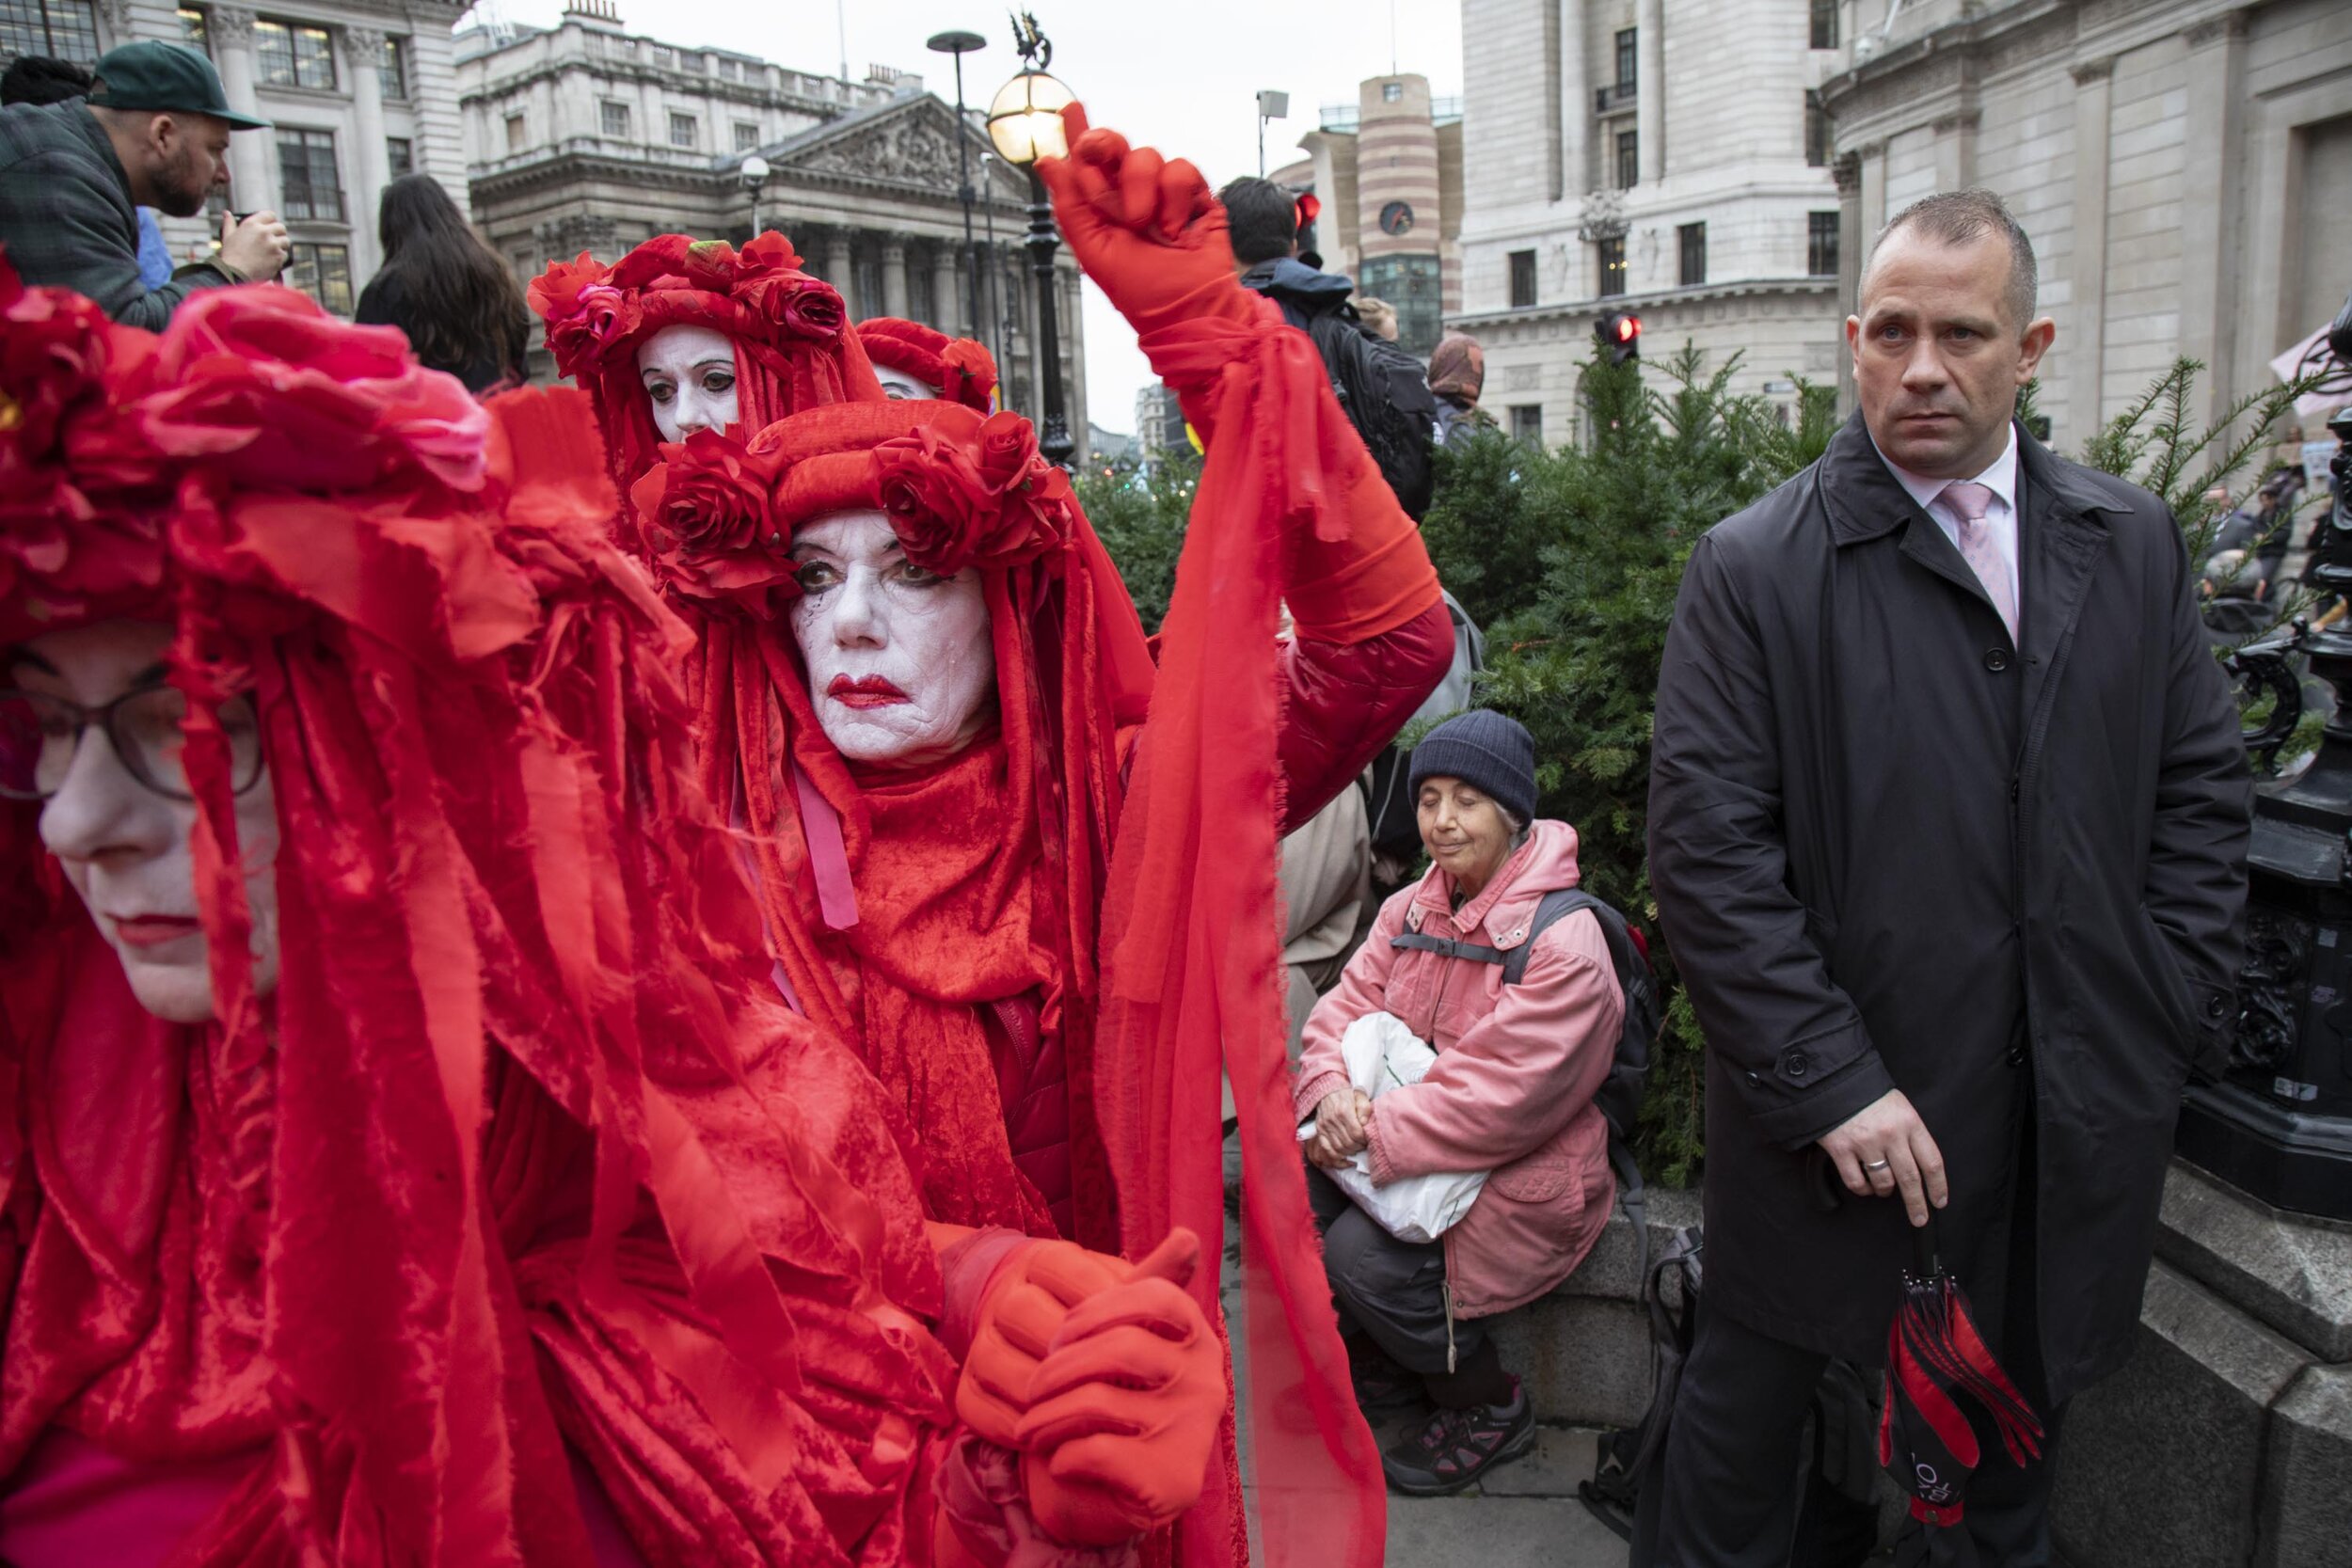  Climate change activist performance art troupe the 'Red Rebel Brigade' march silently at Bank in the heart of the City of London financial district. 